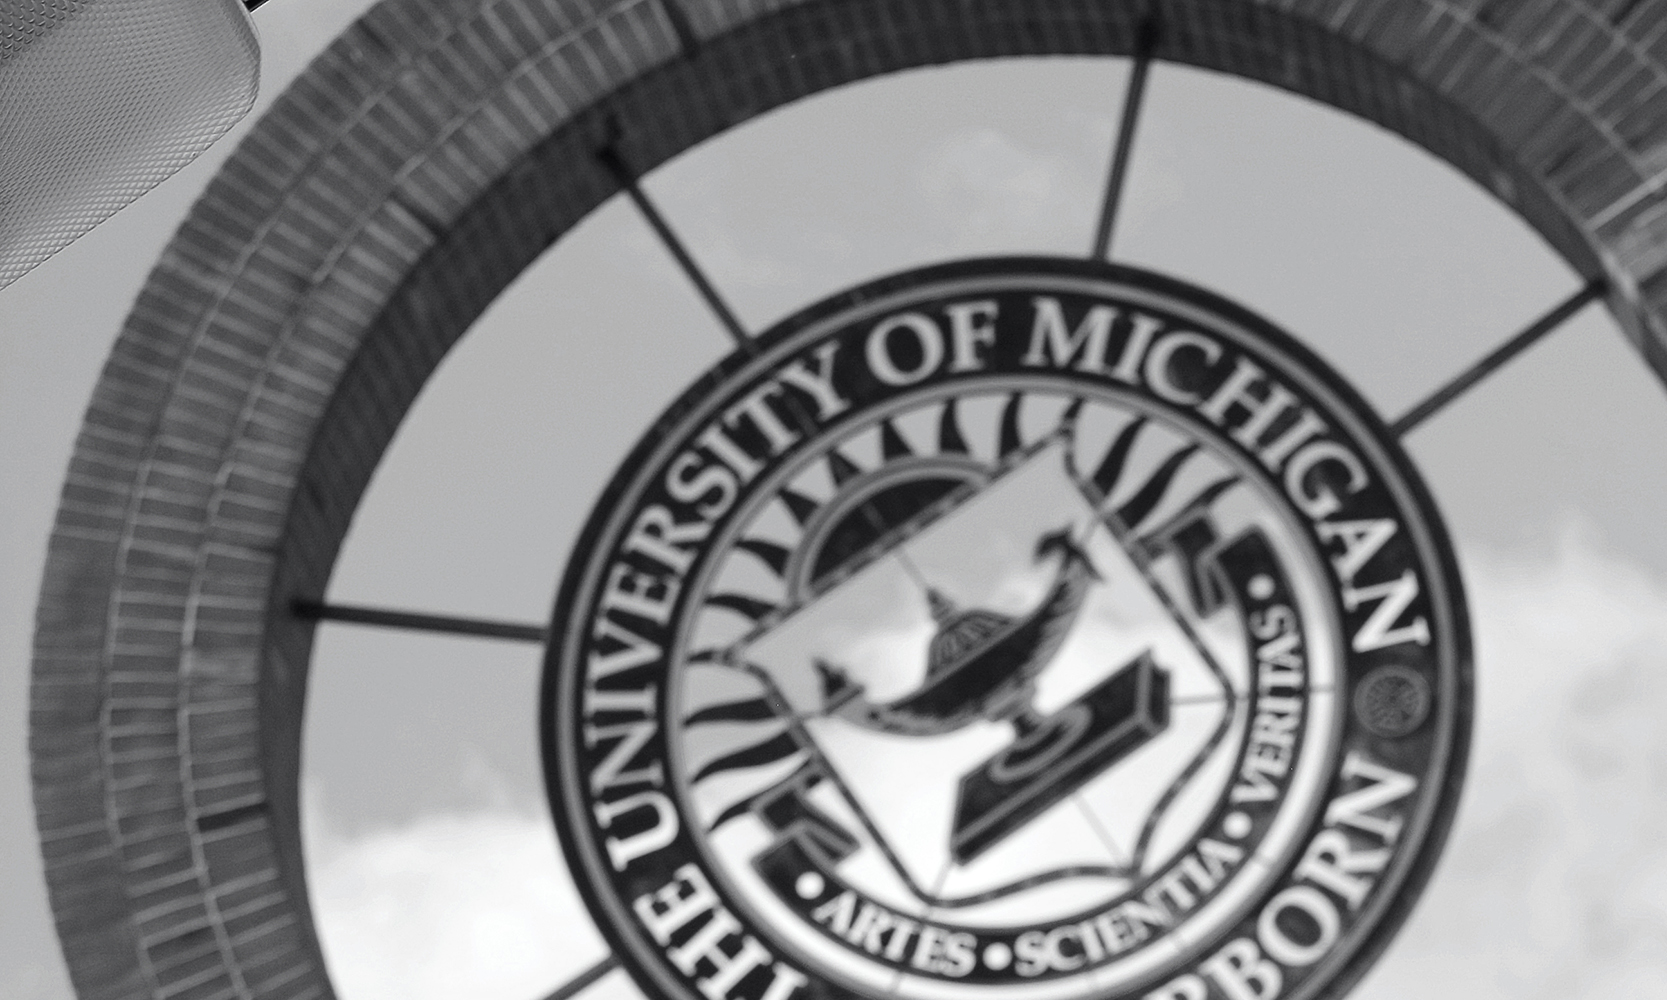 Black and white image of UM-Dearborn seal